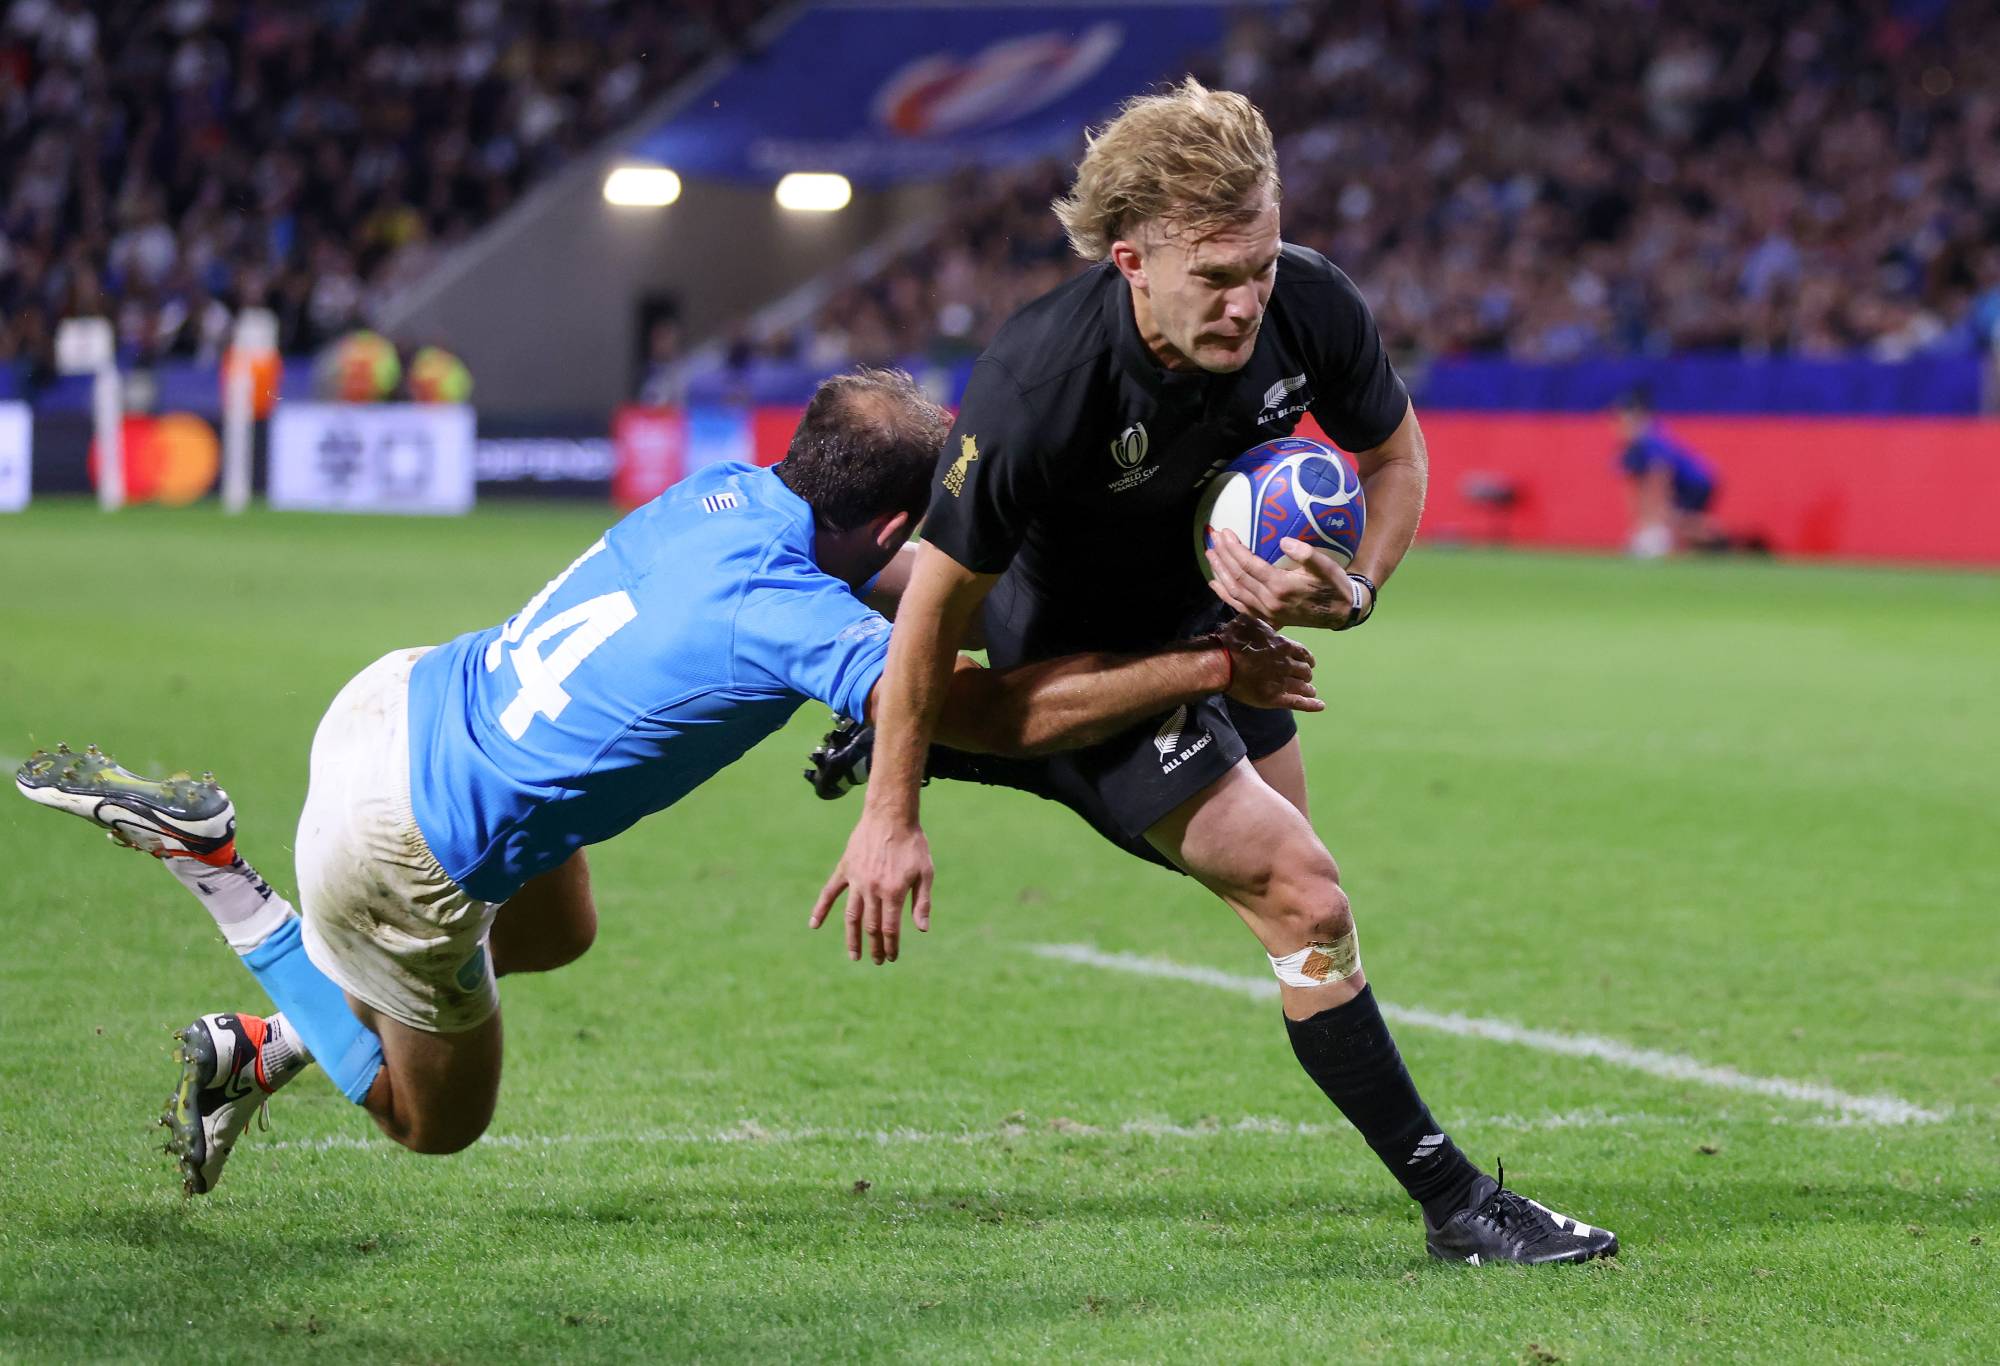 Damian McKenzie of New Zealand is tackled by Gaston Mieres of Uruguay during the Rugby World Cup France 2023 match between New Zealand and Uruguay at Parc Olympique on October 05, 2023 in Lyon, France. (Photo by Paul Harding/Getty Images)